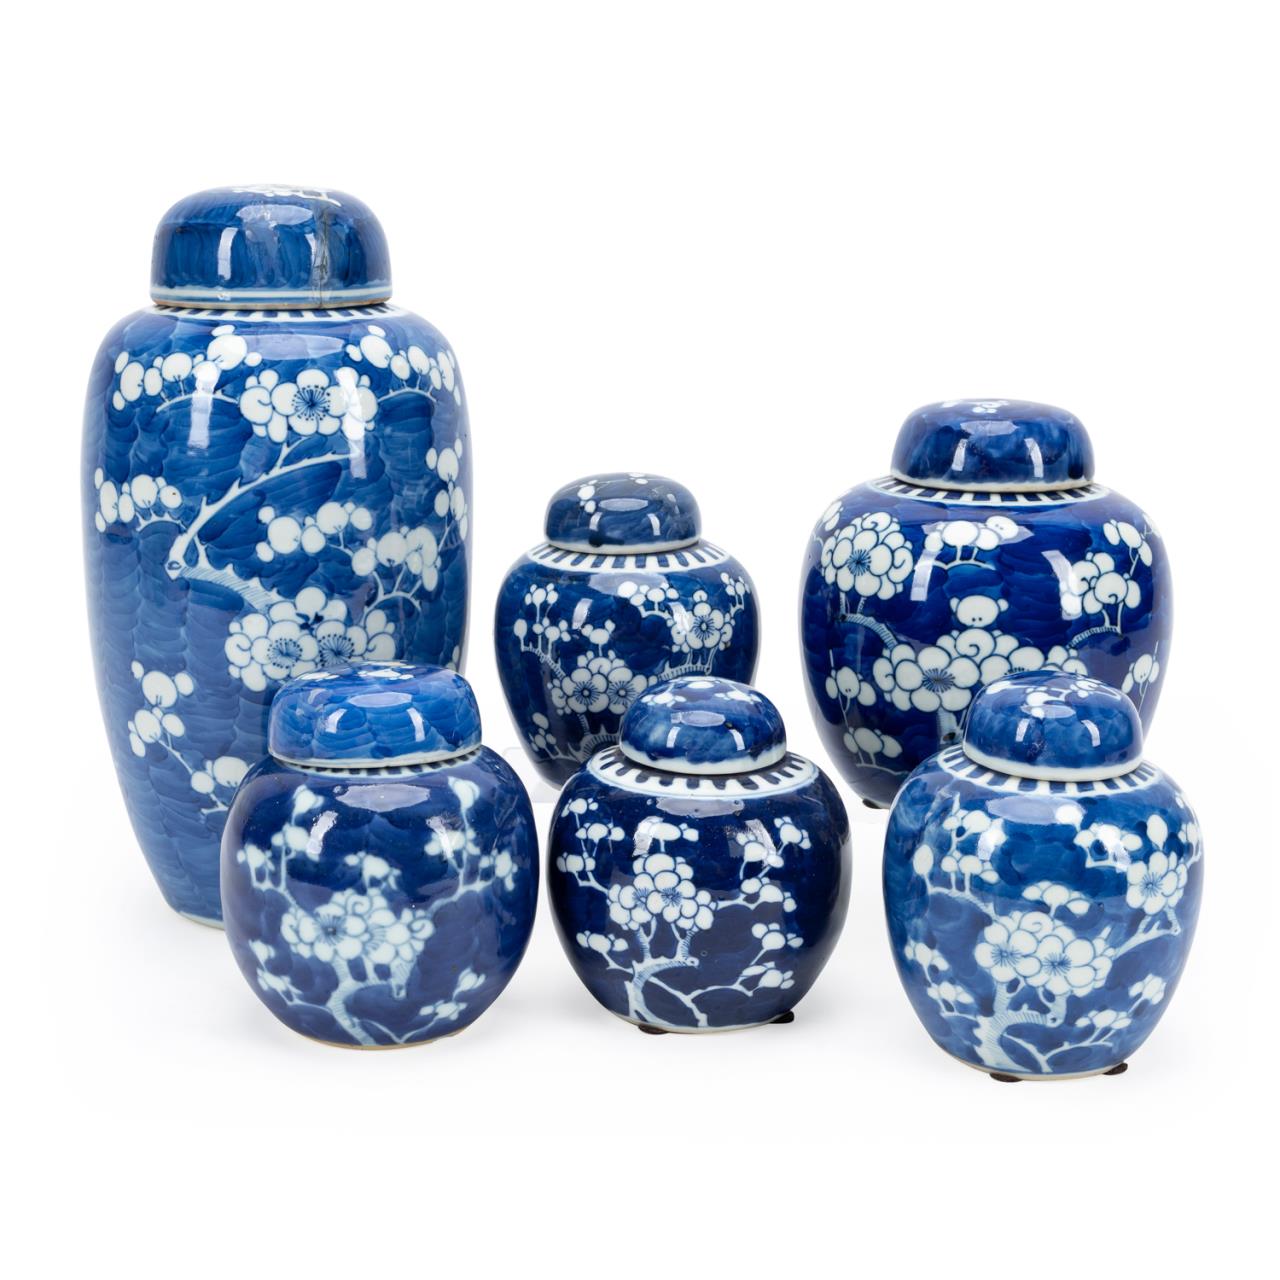 SIX CHINESE BLUE AND WHITE LIDDED